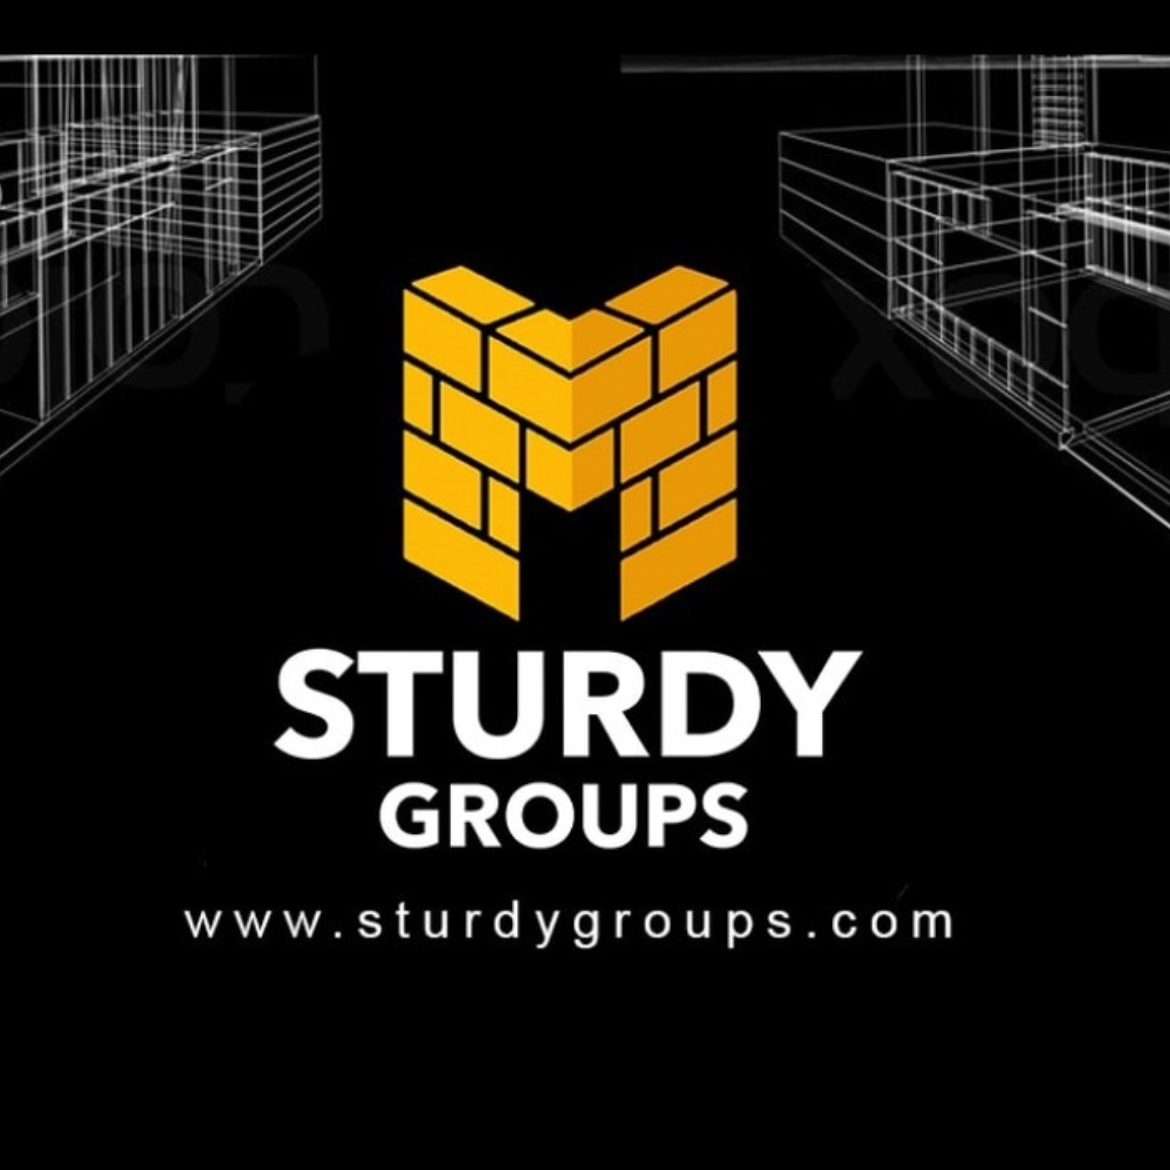 STURDY GROUPS - CONSTRUCTIONS AND INTERIORS Logo